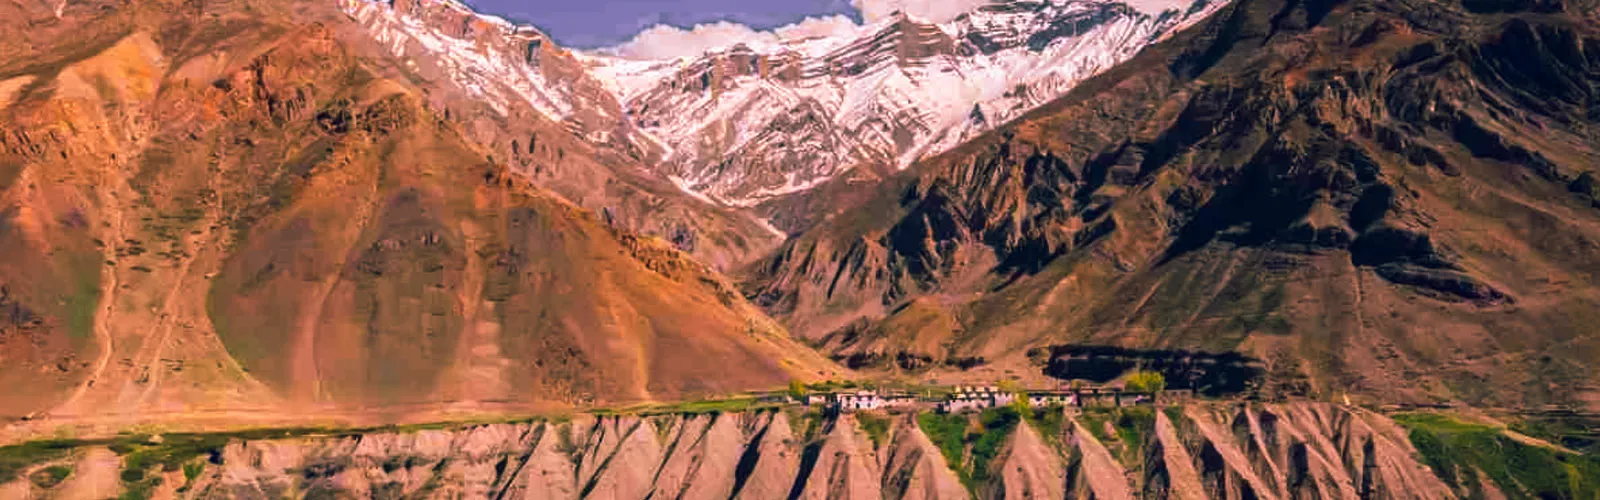 Pin Valley National Park Spiti valley